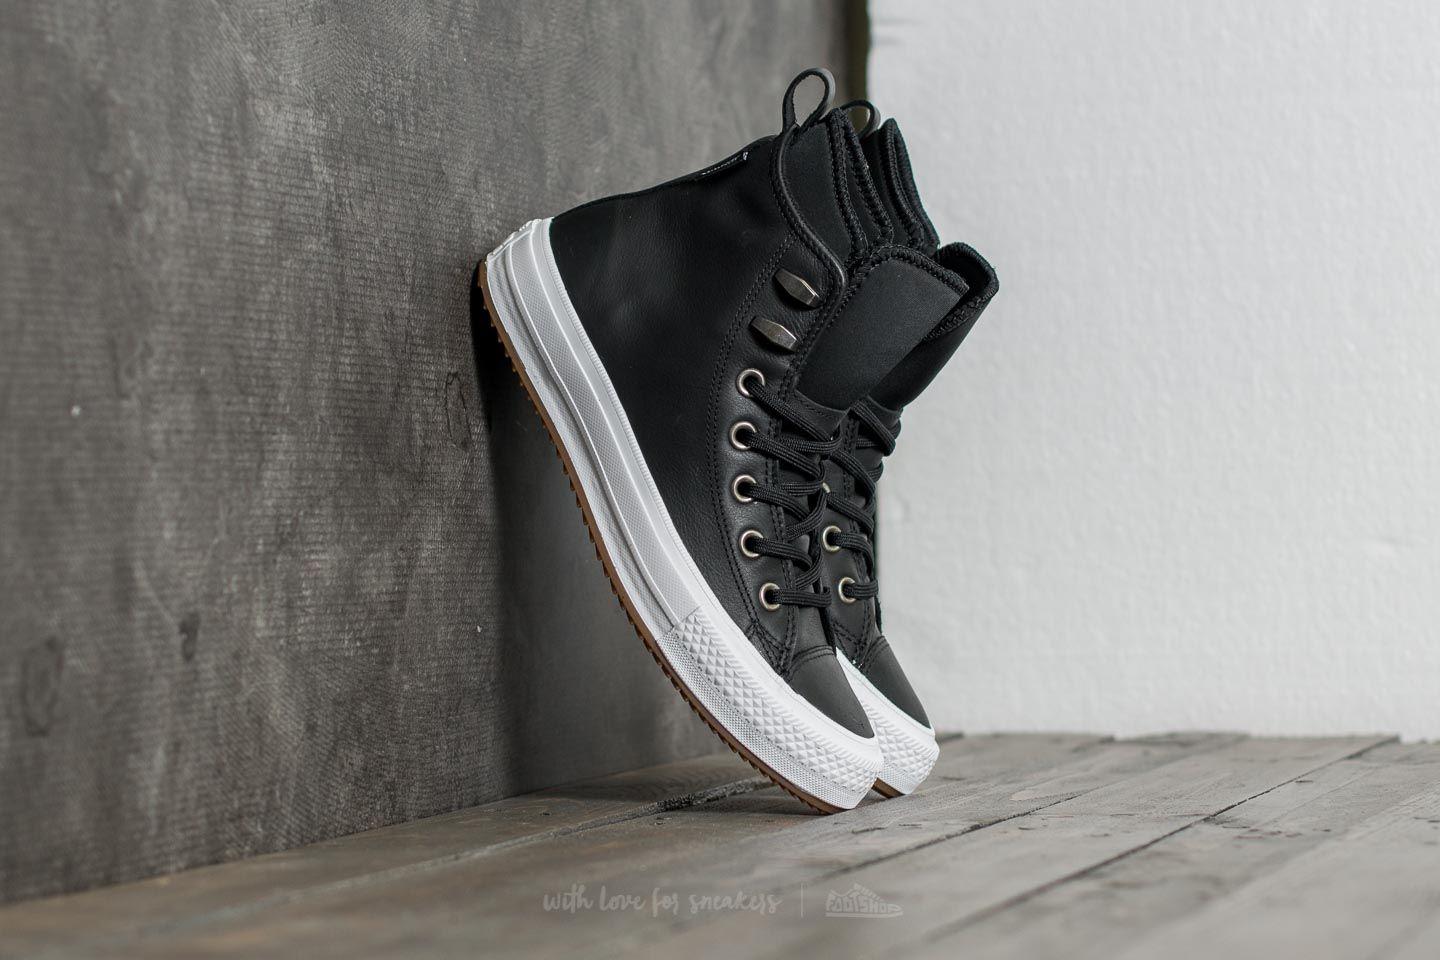 chuck taylor all star waterproof leather high top boot